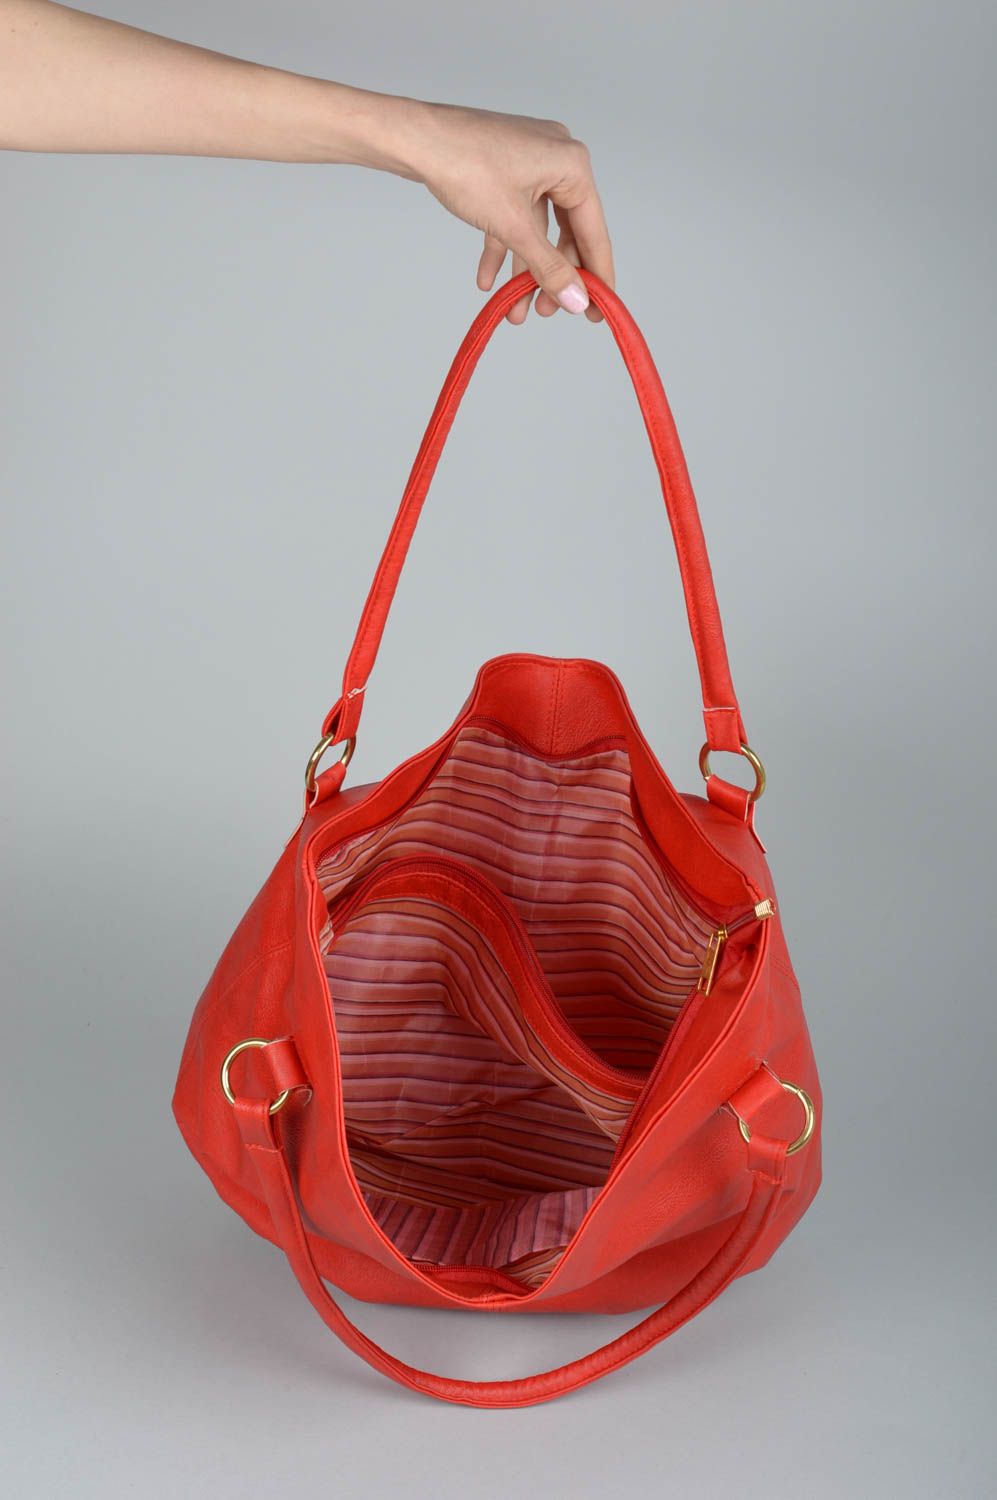 NWT Zara red quilted chain strap bag | Chain strap bag, Bag straps, Bags